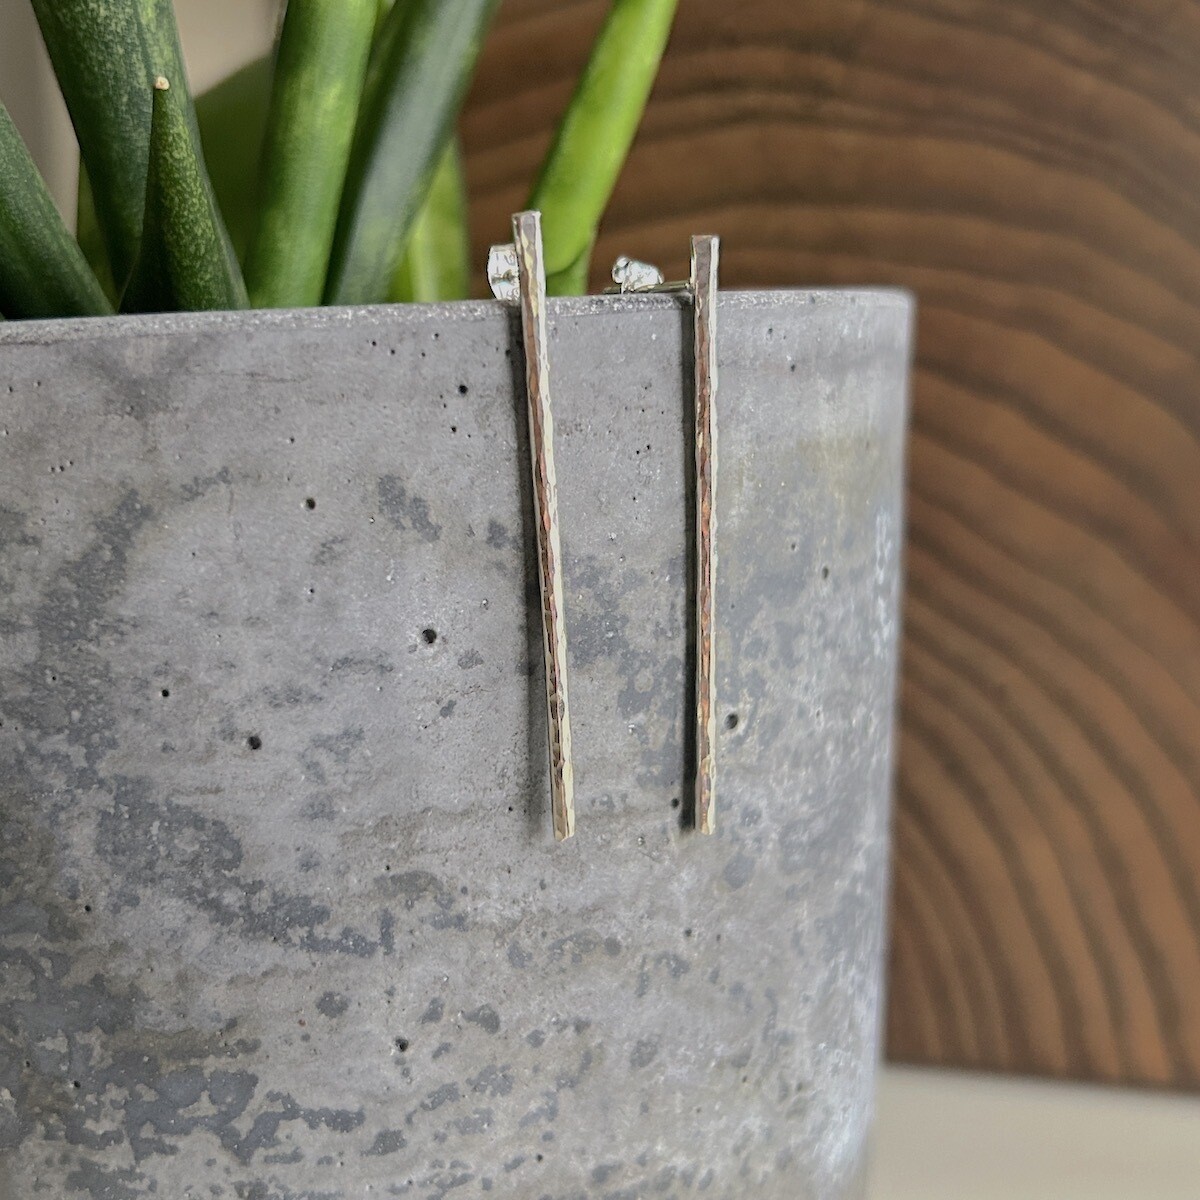 Handmade Silver Earrings with 2" hammered silver stick, post